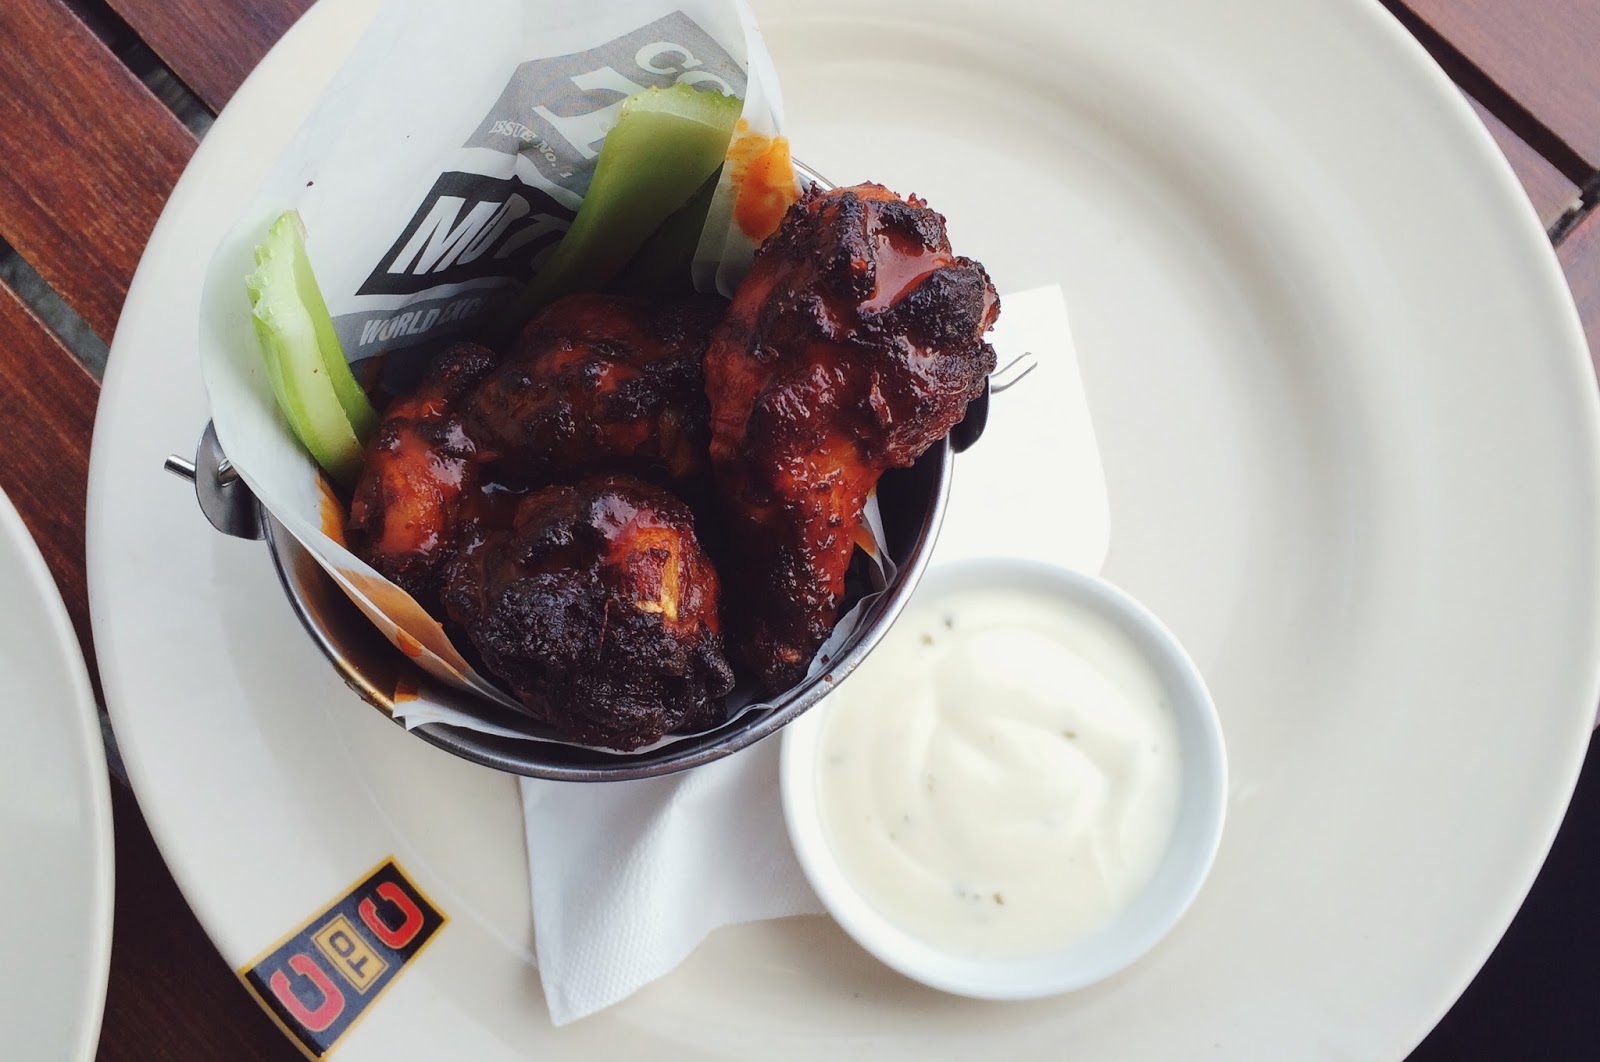 If you find yourself in Portsmouth and suddenly fancy some amazing American style food, then visit Coast to Coast: from blue cheese burgers to spicy chicken wings, you won't be disappointed.